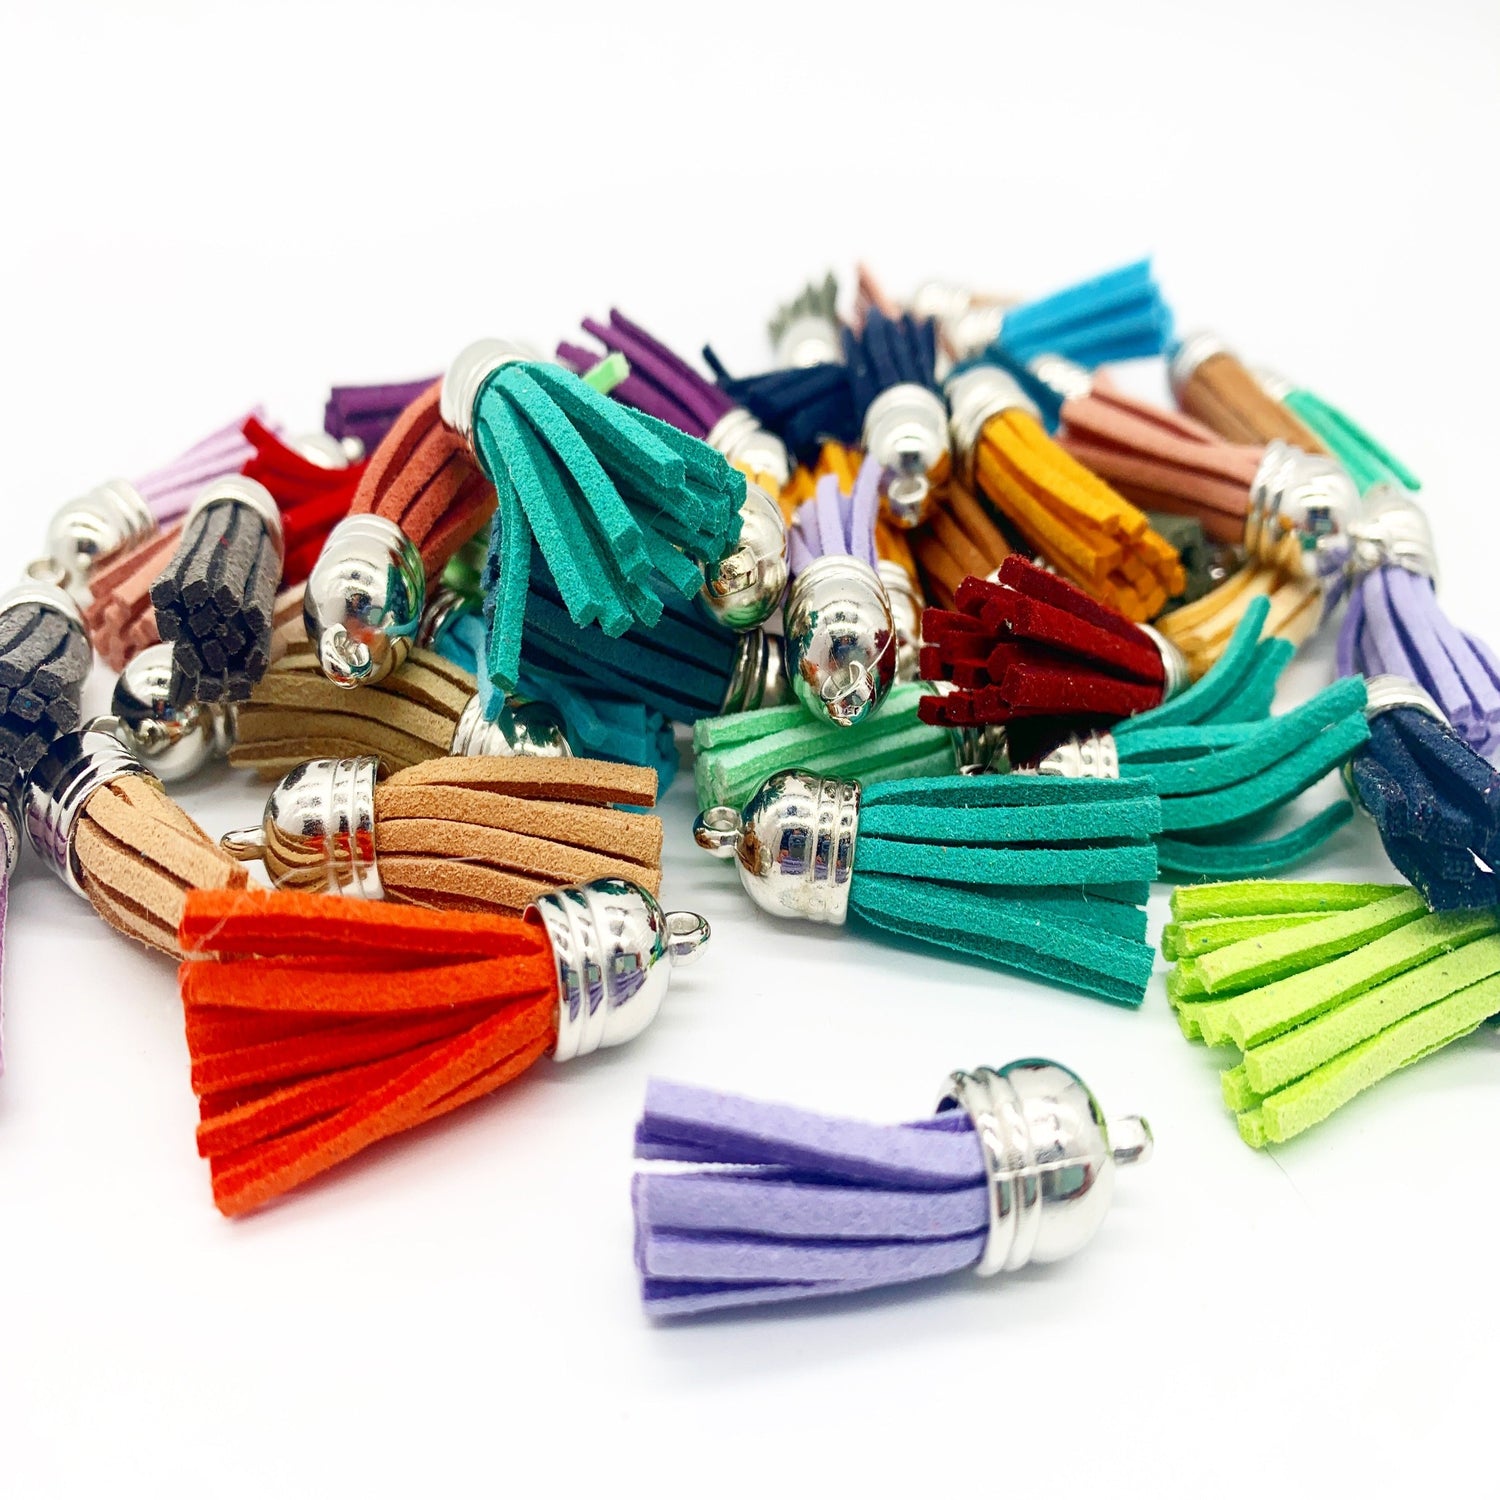 Tassles for keychains in different colors